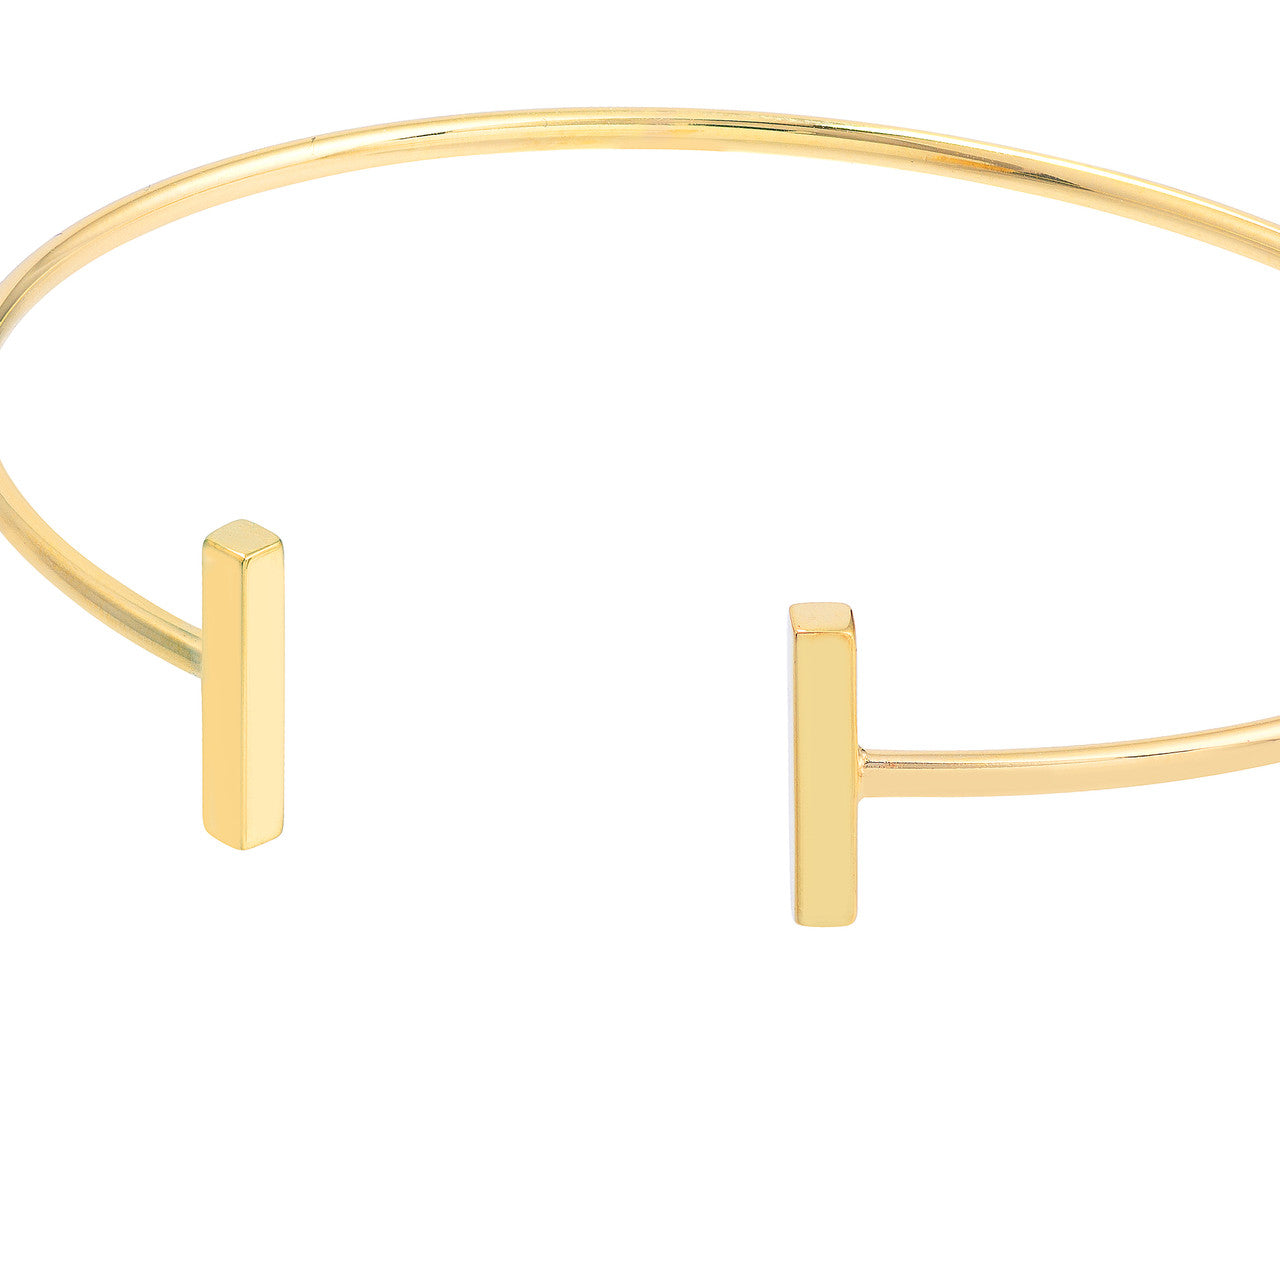 close up of the staple bars of a yellow gold bracelet